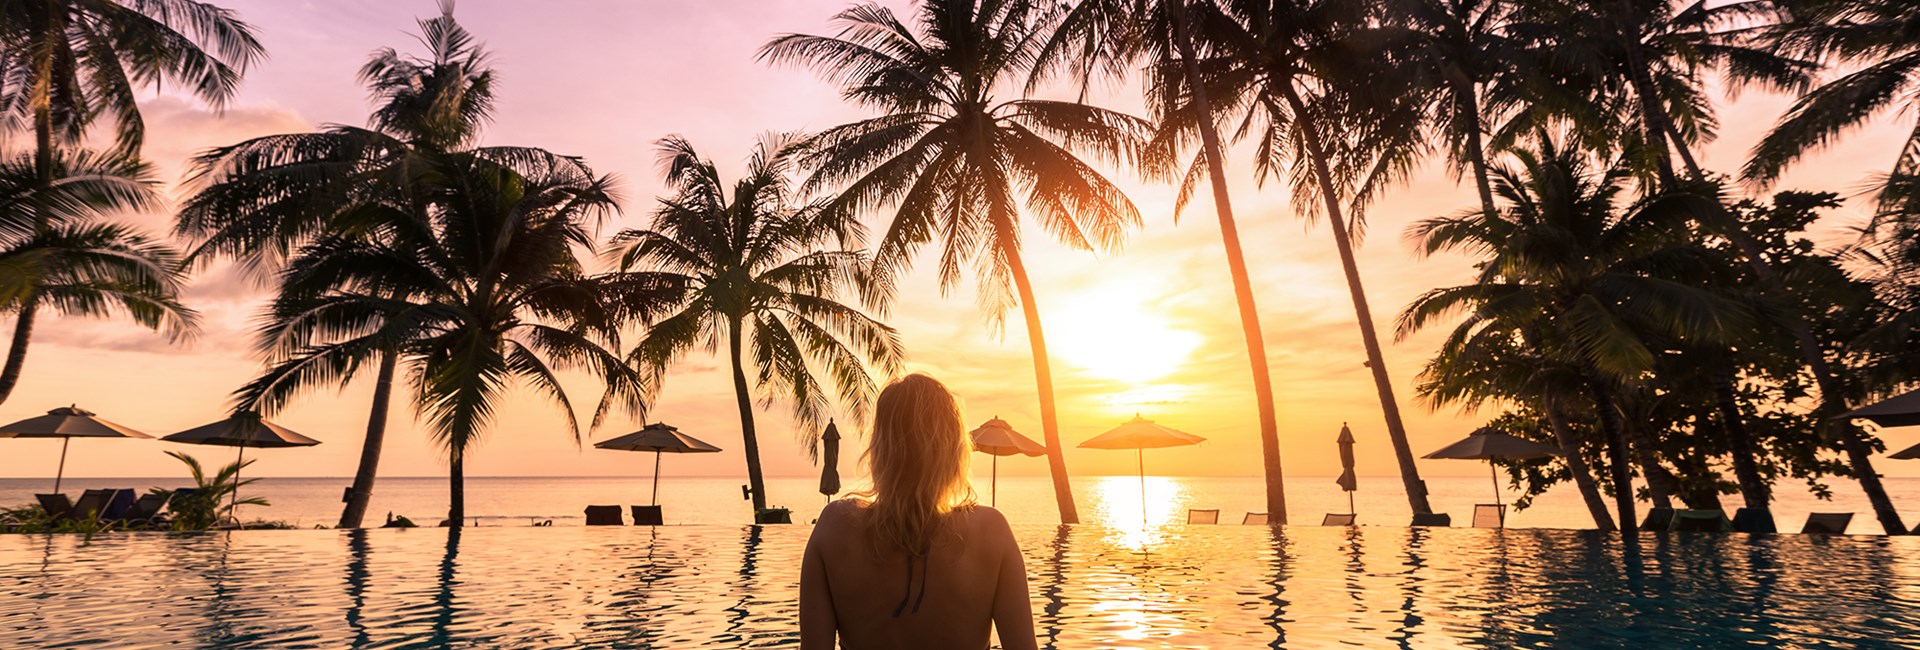 woman relaxing by infinity pool of luxury hotel watching sun set into sea